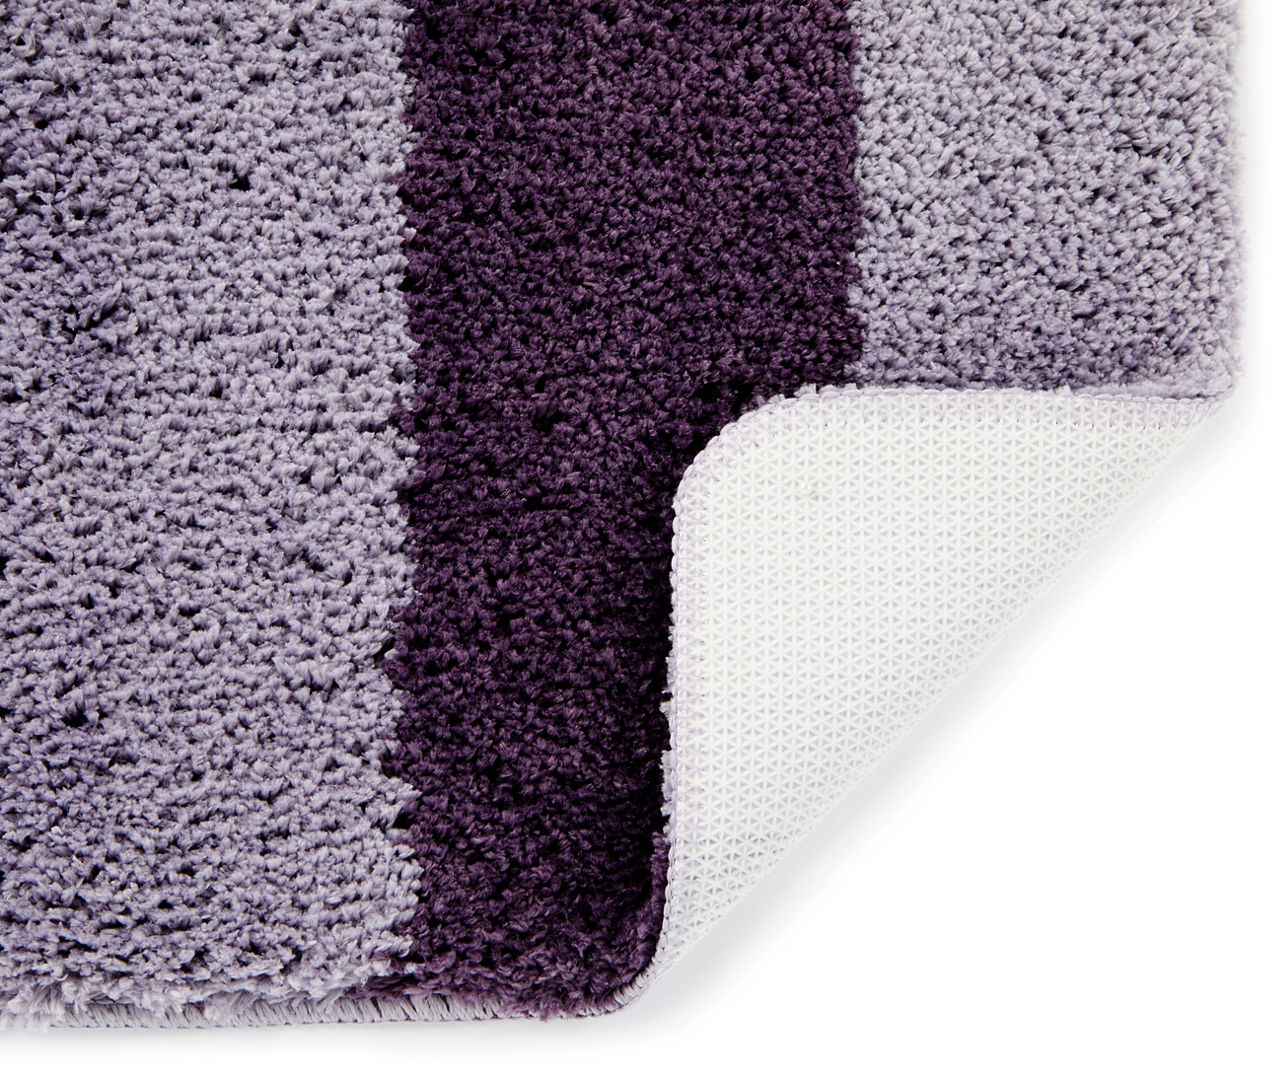 Bibb Home® Ombre Shag Bath Rug (1- or 2-Pack) - Pick Your Plum